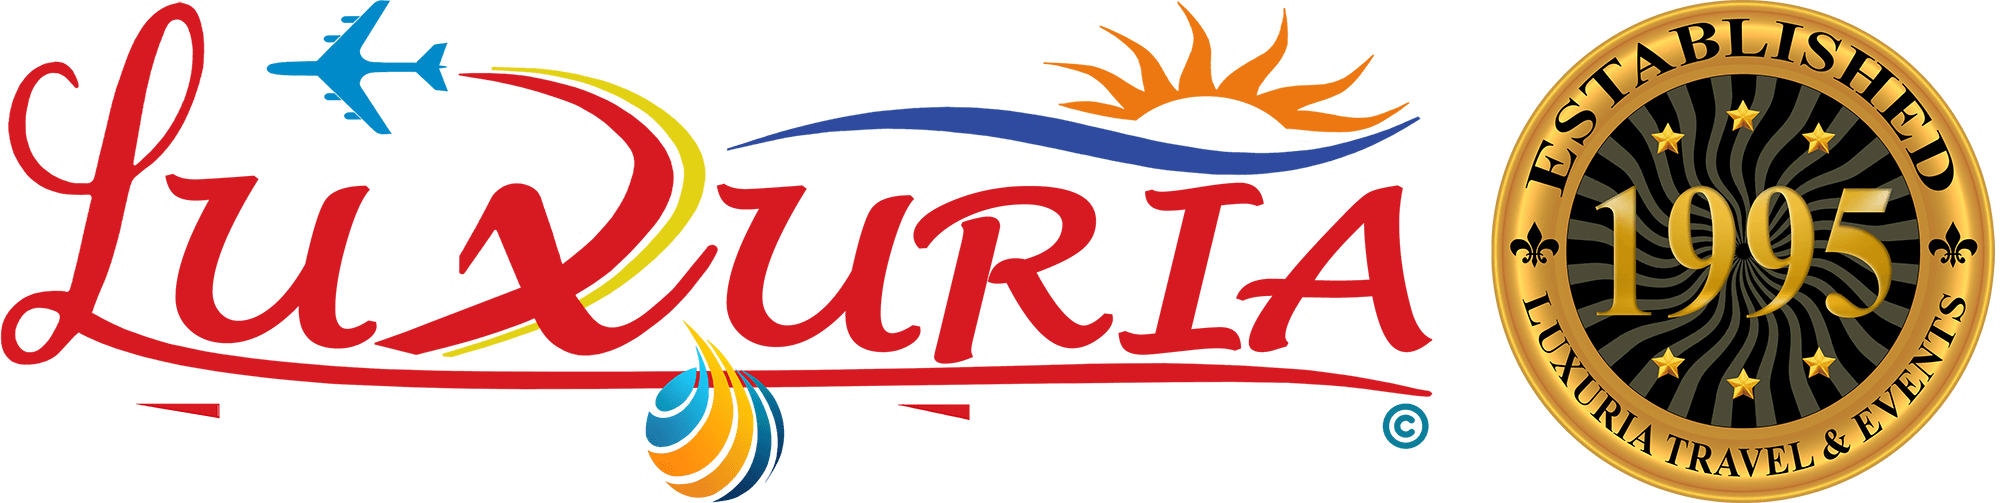 Luxuria Travel & Events | Global Village ⋆ Luxuria Travel & Events